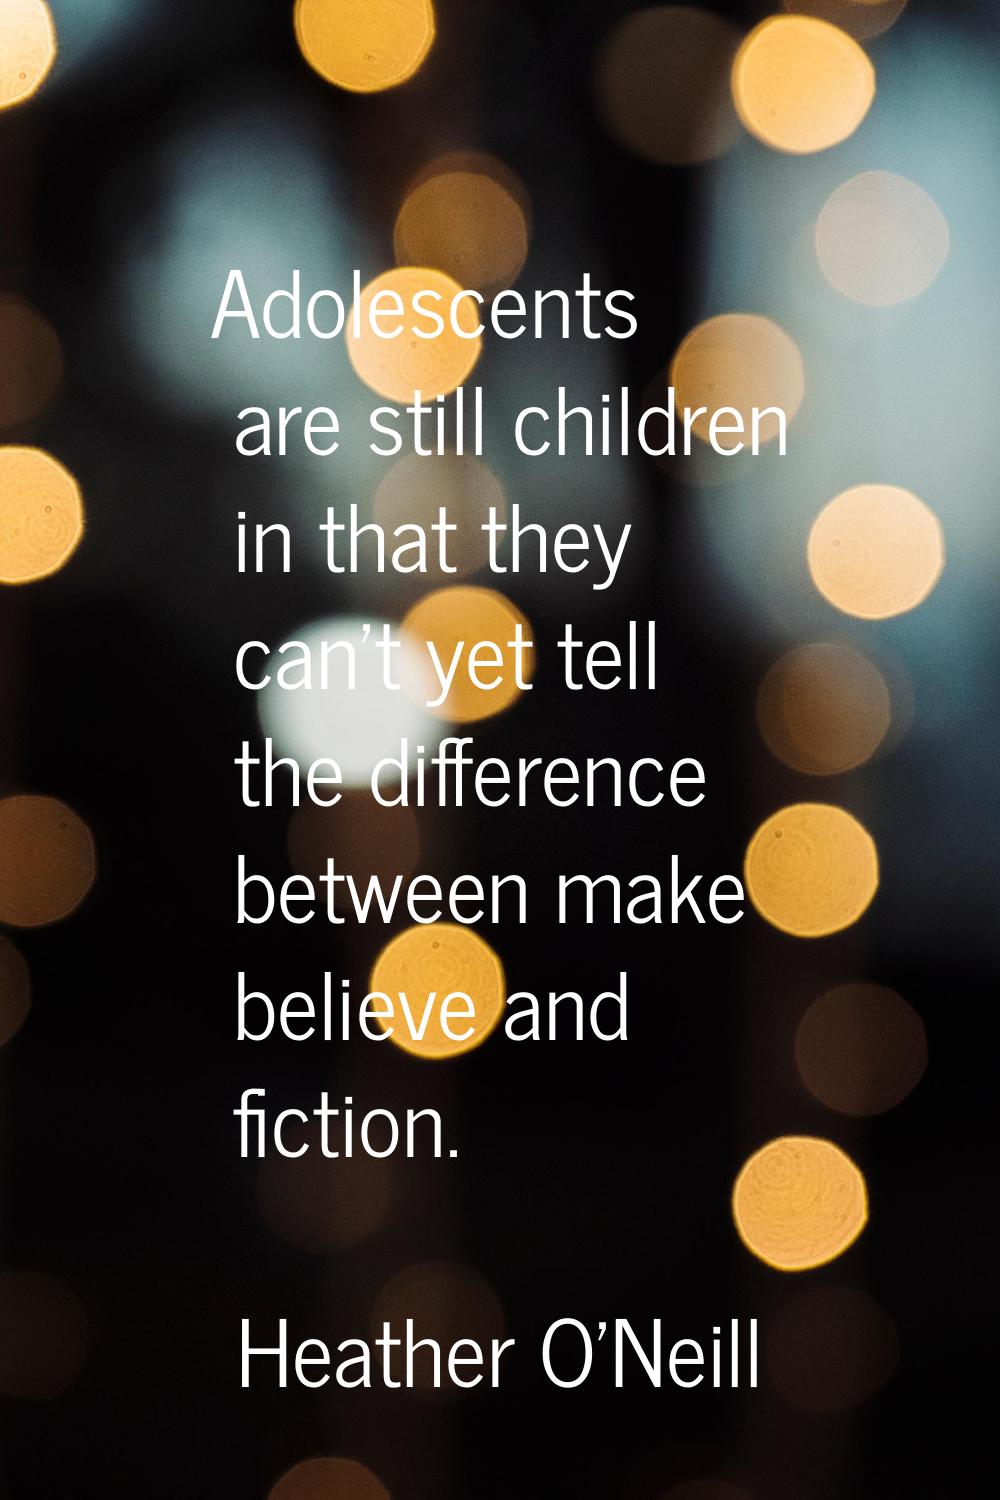 Adolescents are still children in that they can't yet tell the difference between make believe and 